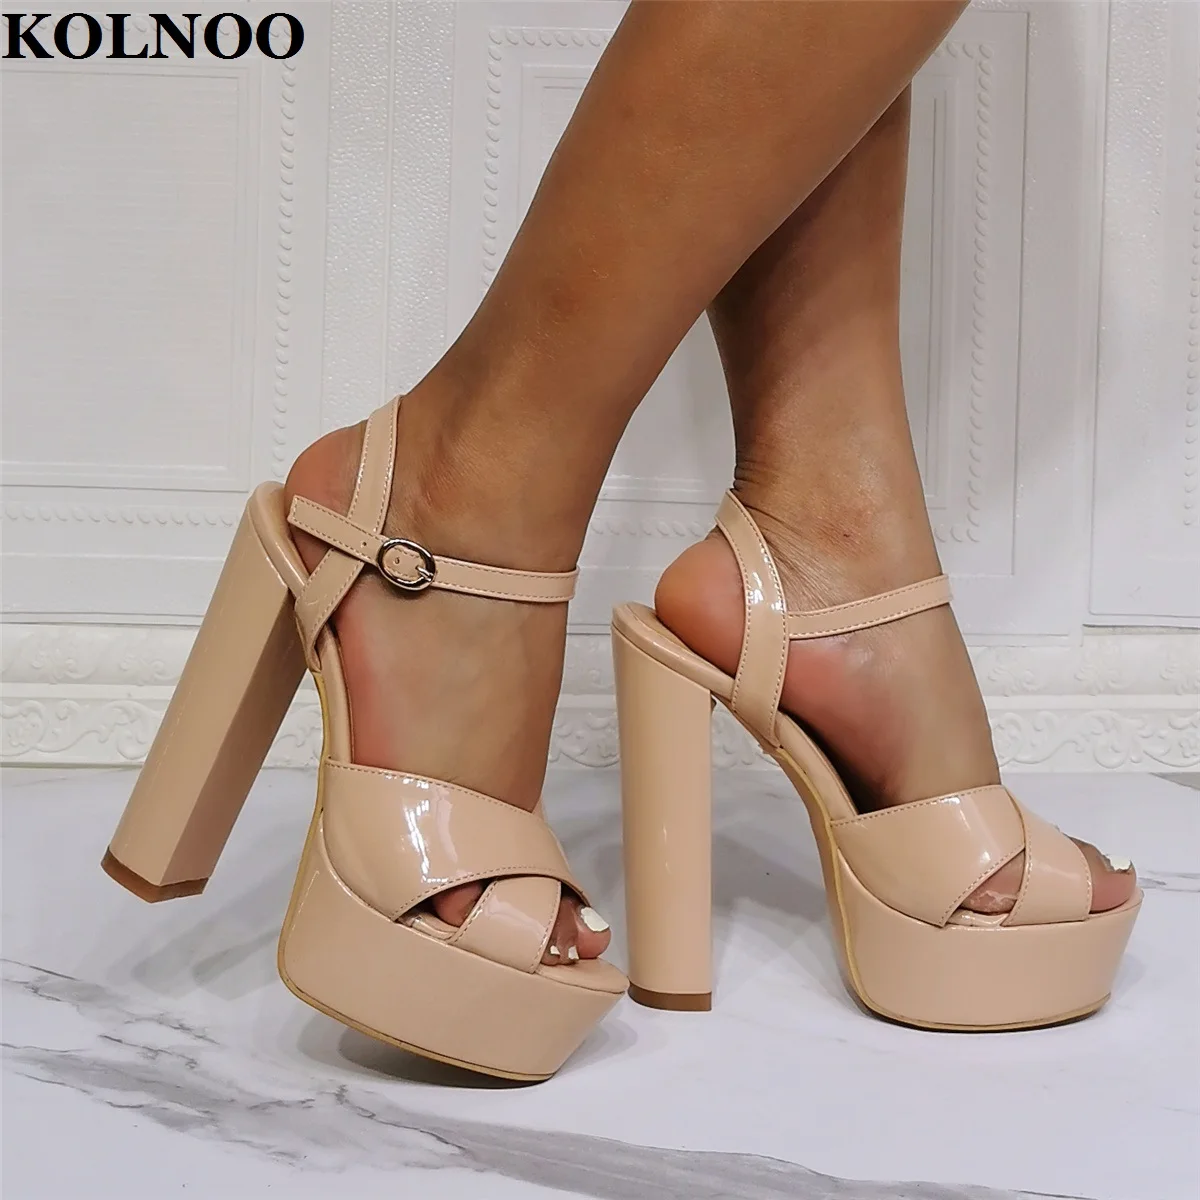 

Kolnoo New Real Photos US5-15 Womens Sandals Chunky Heels Sexy Platform Party Prom Summer Shoes Evening Club Fashion Sandals